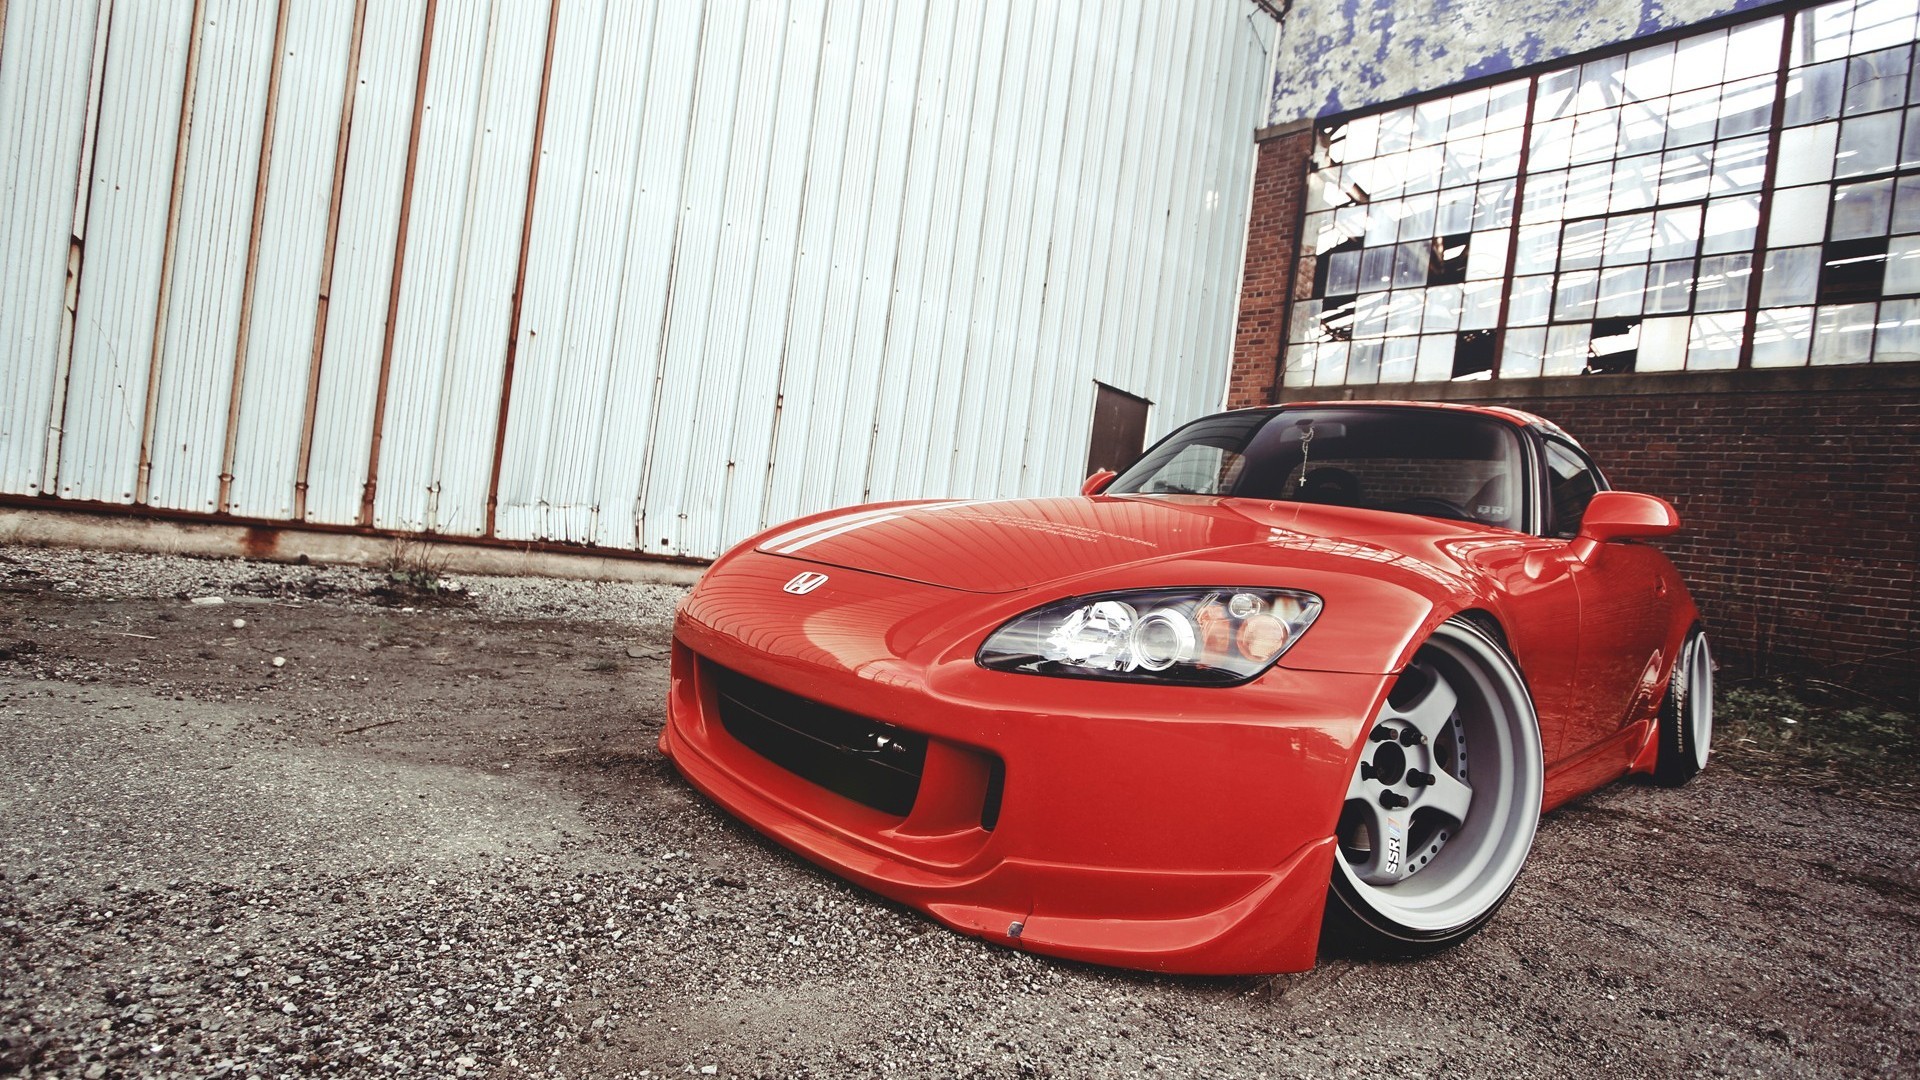 Honda S2000 Stance Car Red Cars Vehicle Car Red Cars 1920x1080